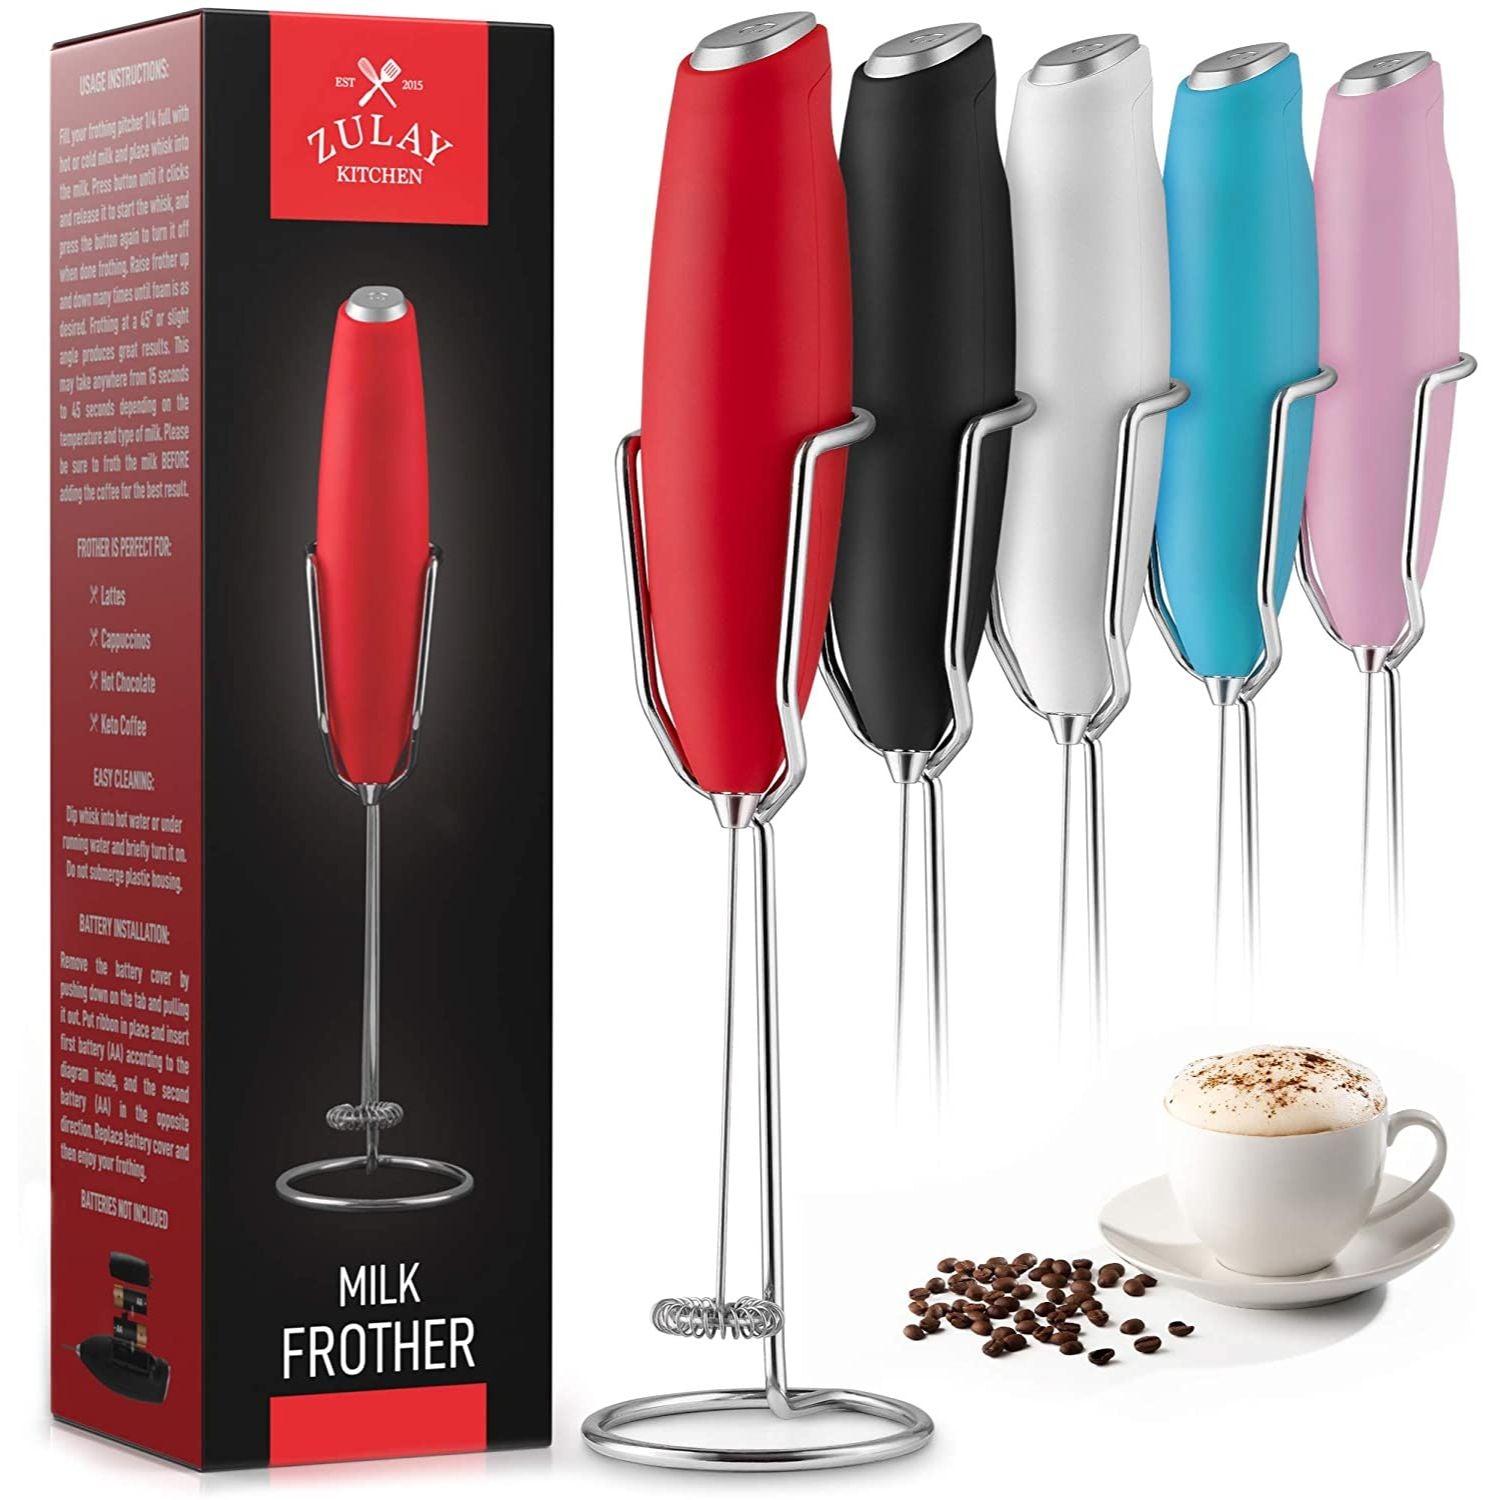 Double Grip Milk Frother for Coffee with Upgraded Holster Stand - Red